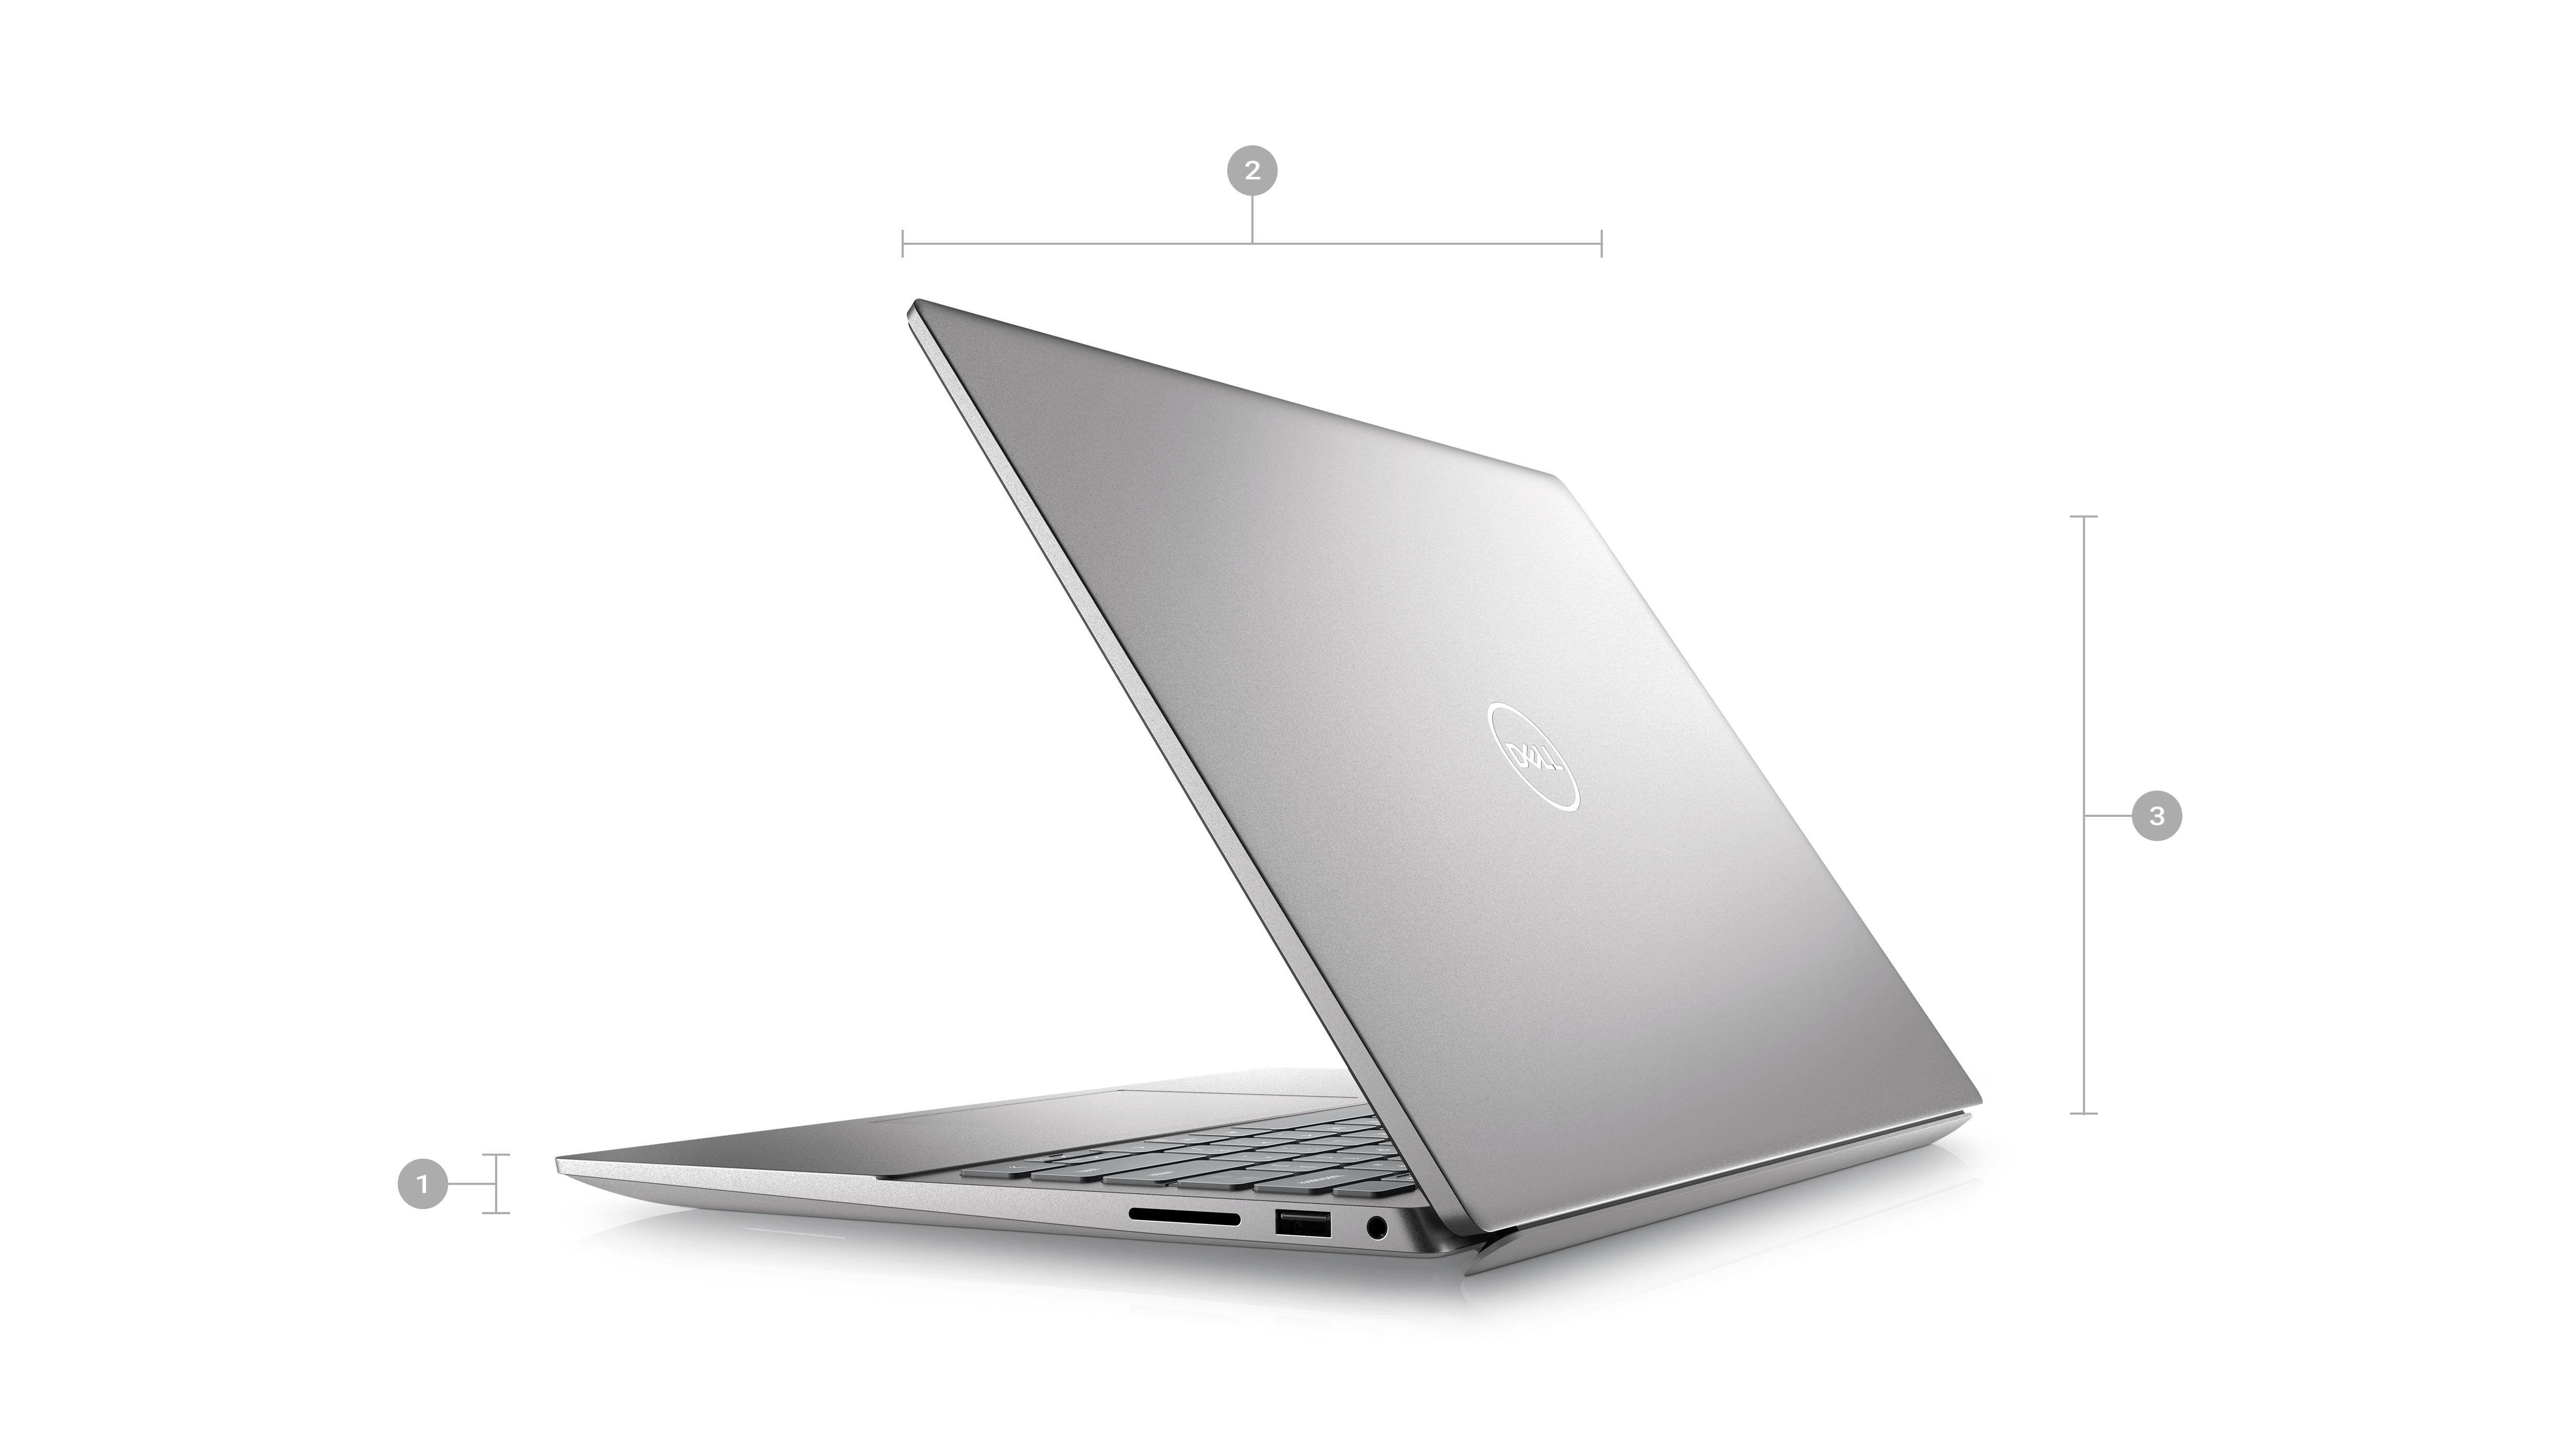 Picture of an Inspiron 5420 laptop with its back visible and numbers from 1 to 3 signaling product dimensions & weight.